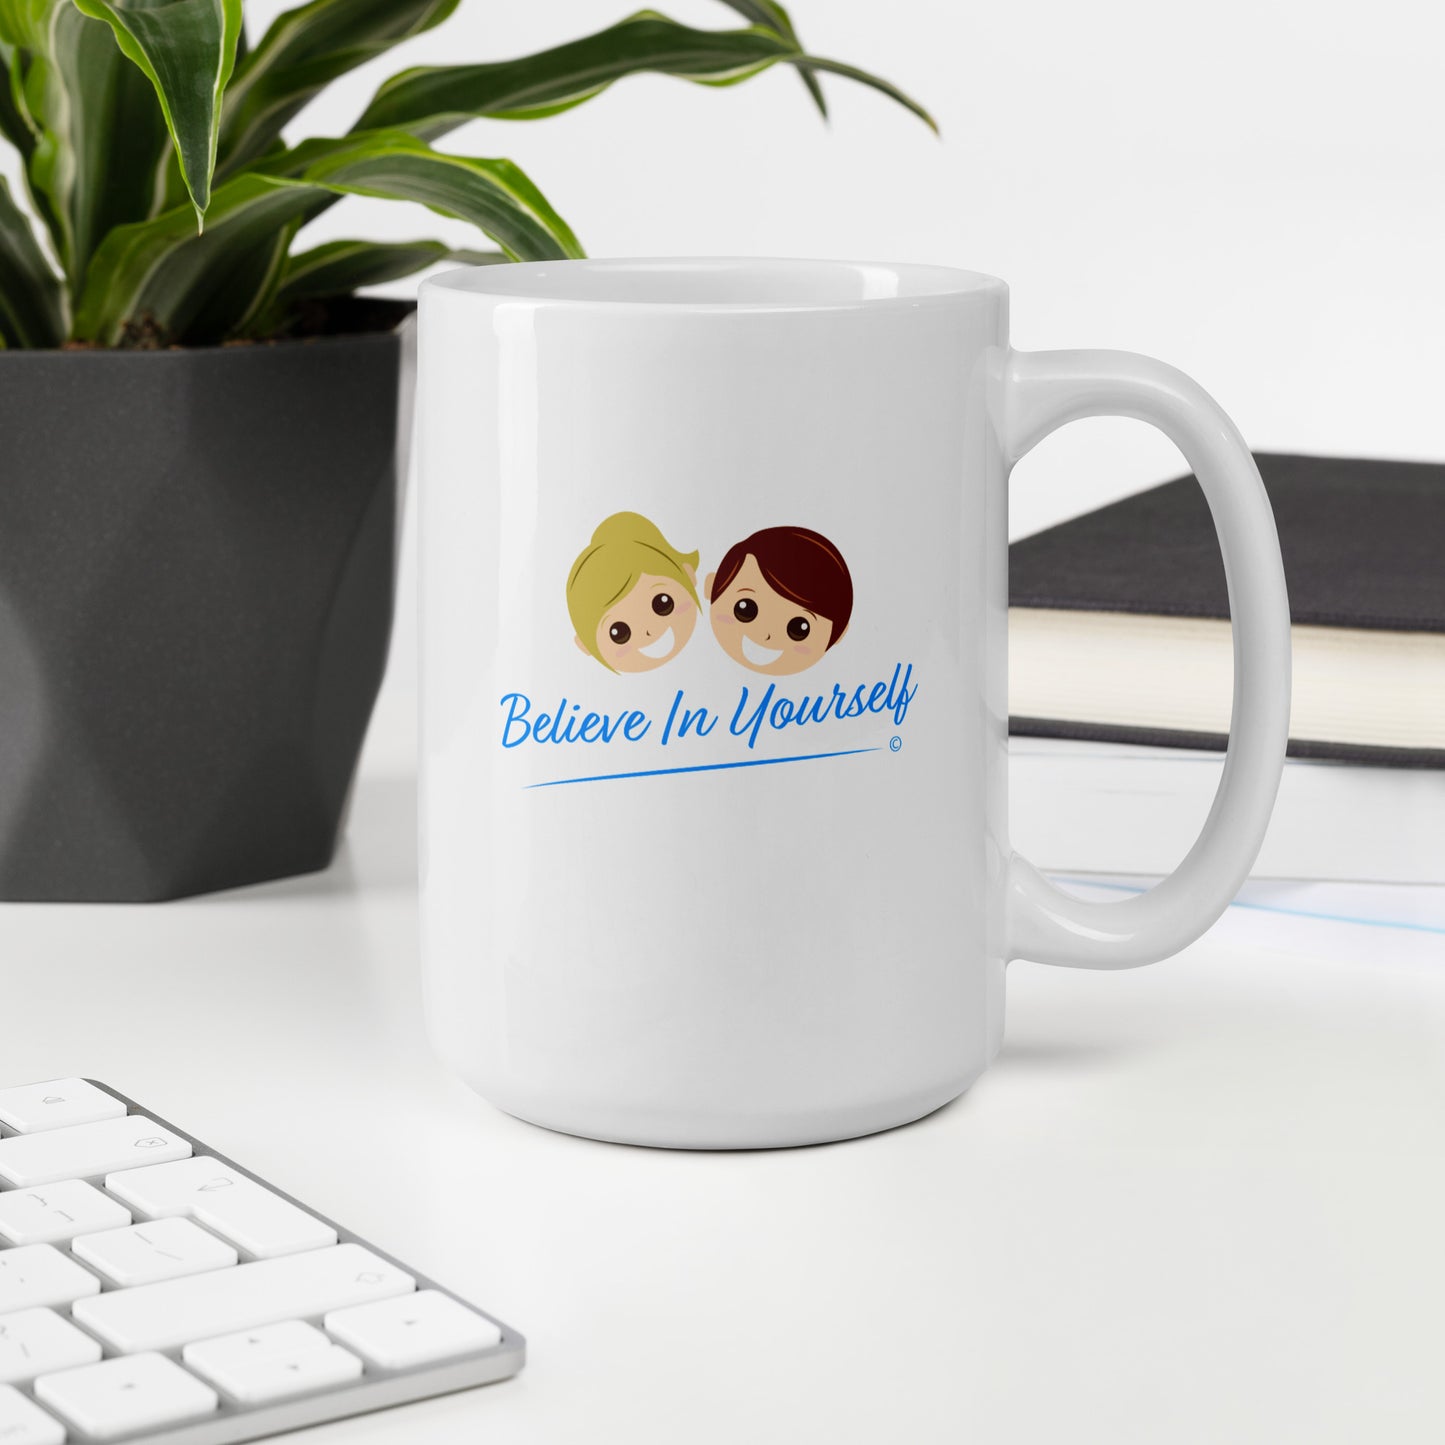 Believe in Yourself White Glossy Mugs